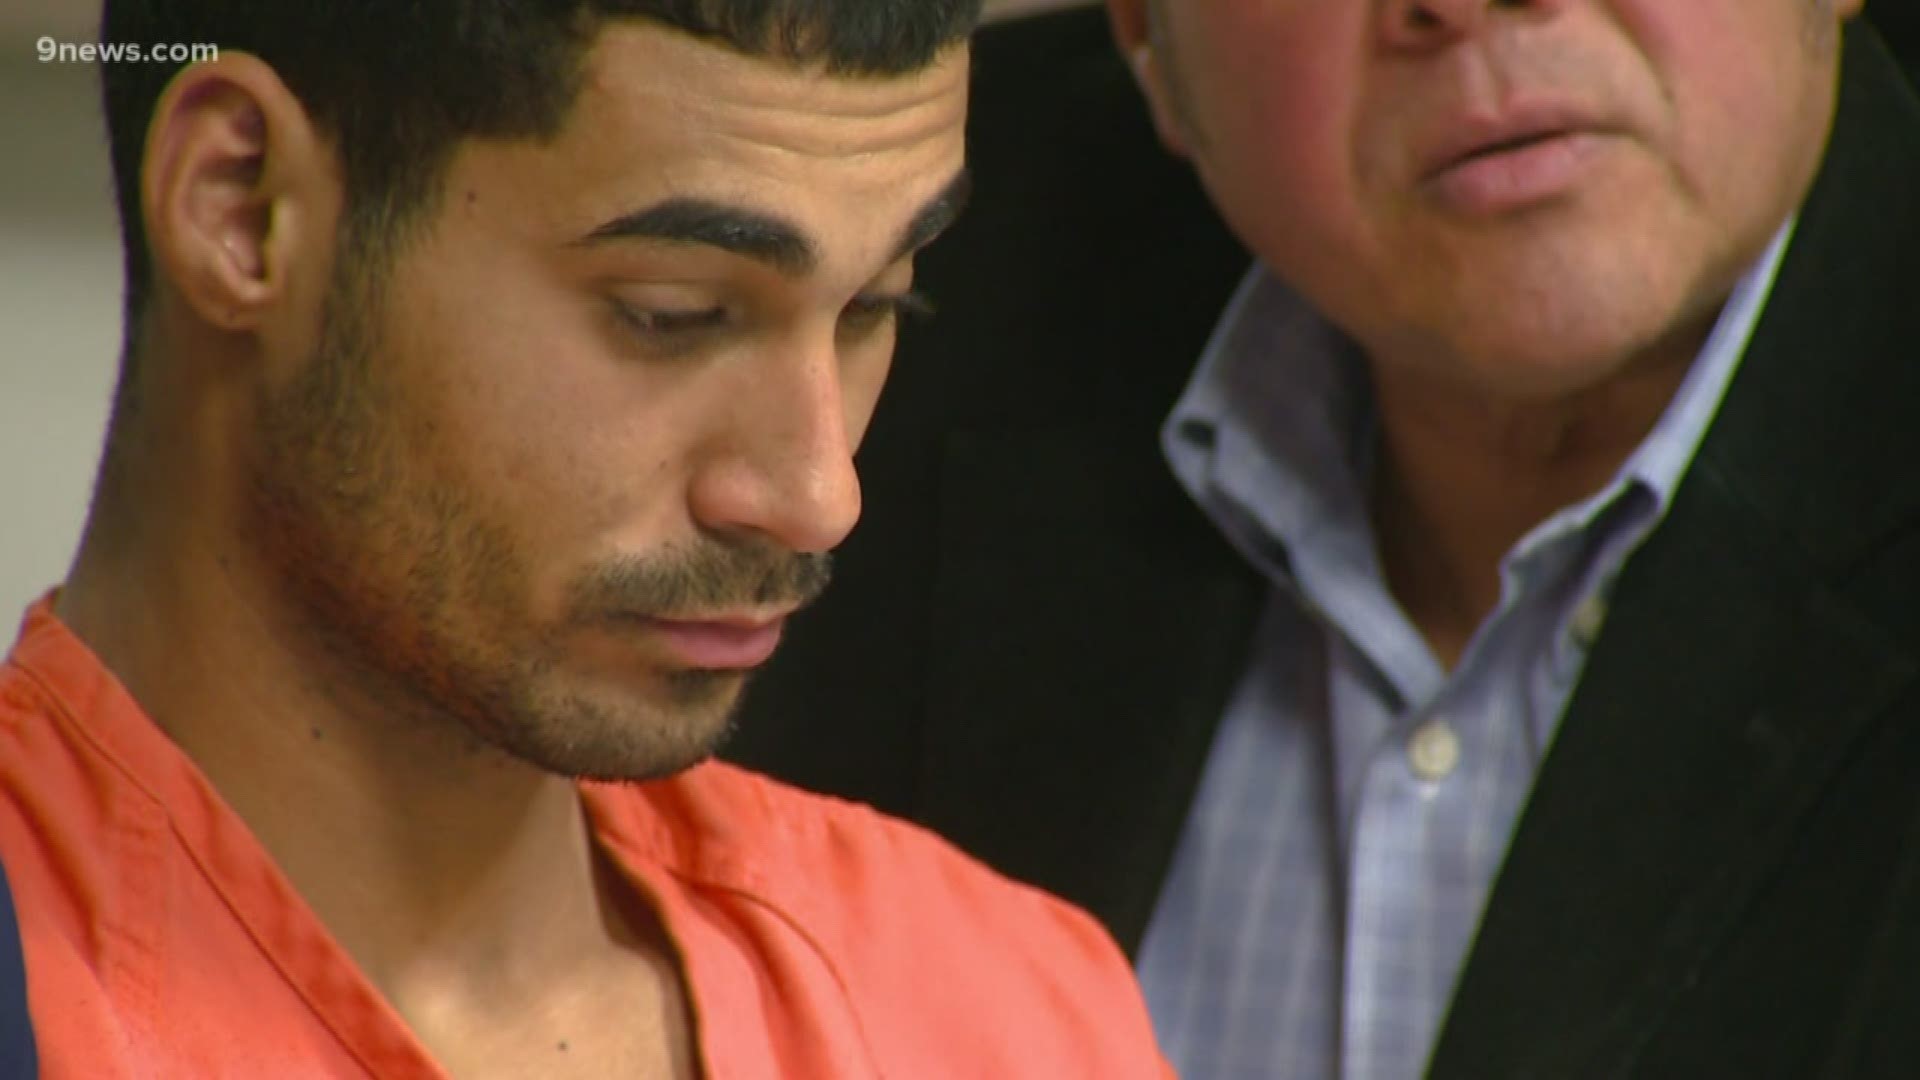 Rogel Aguilera-Mederos is in court at 11 a.m. for an arraignment hearing which is typically when a plea is entered.